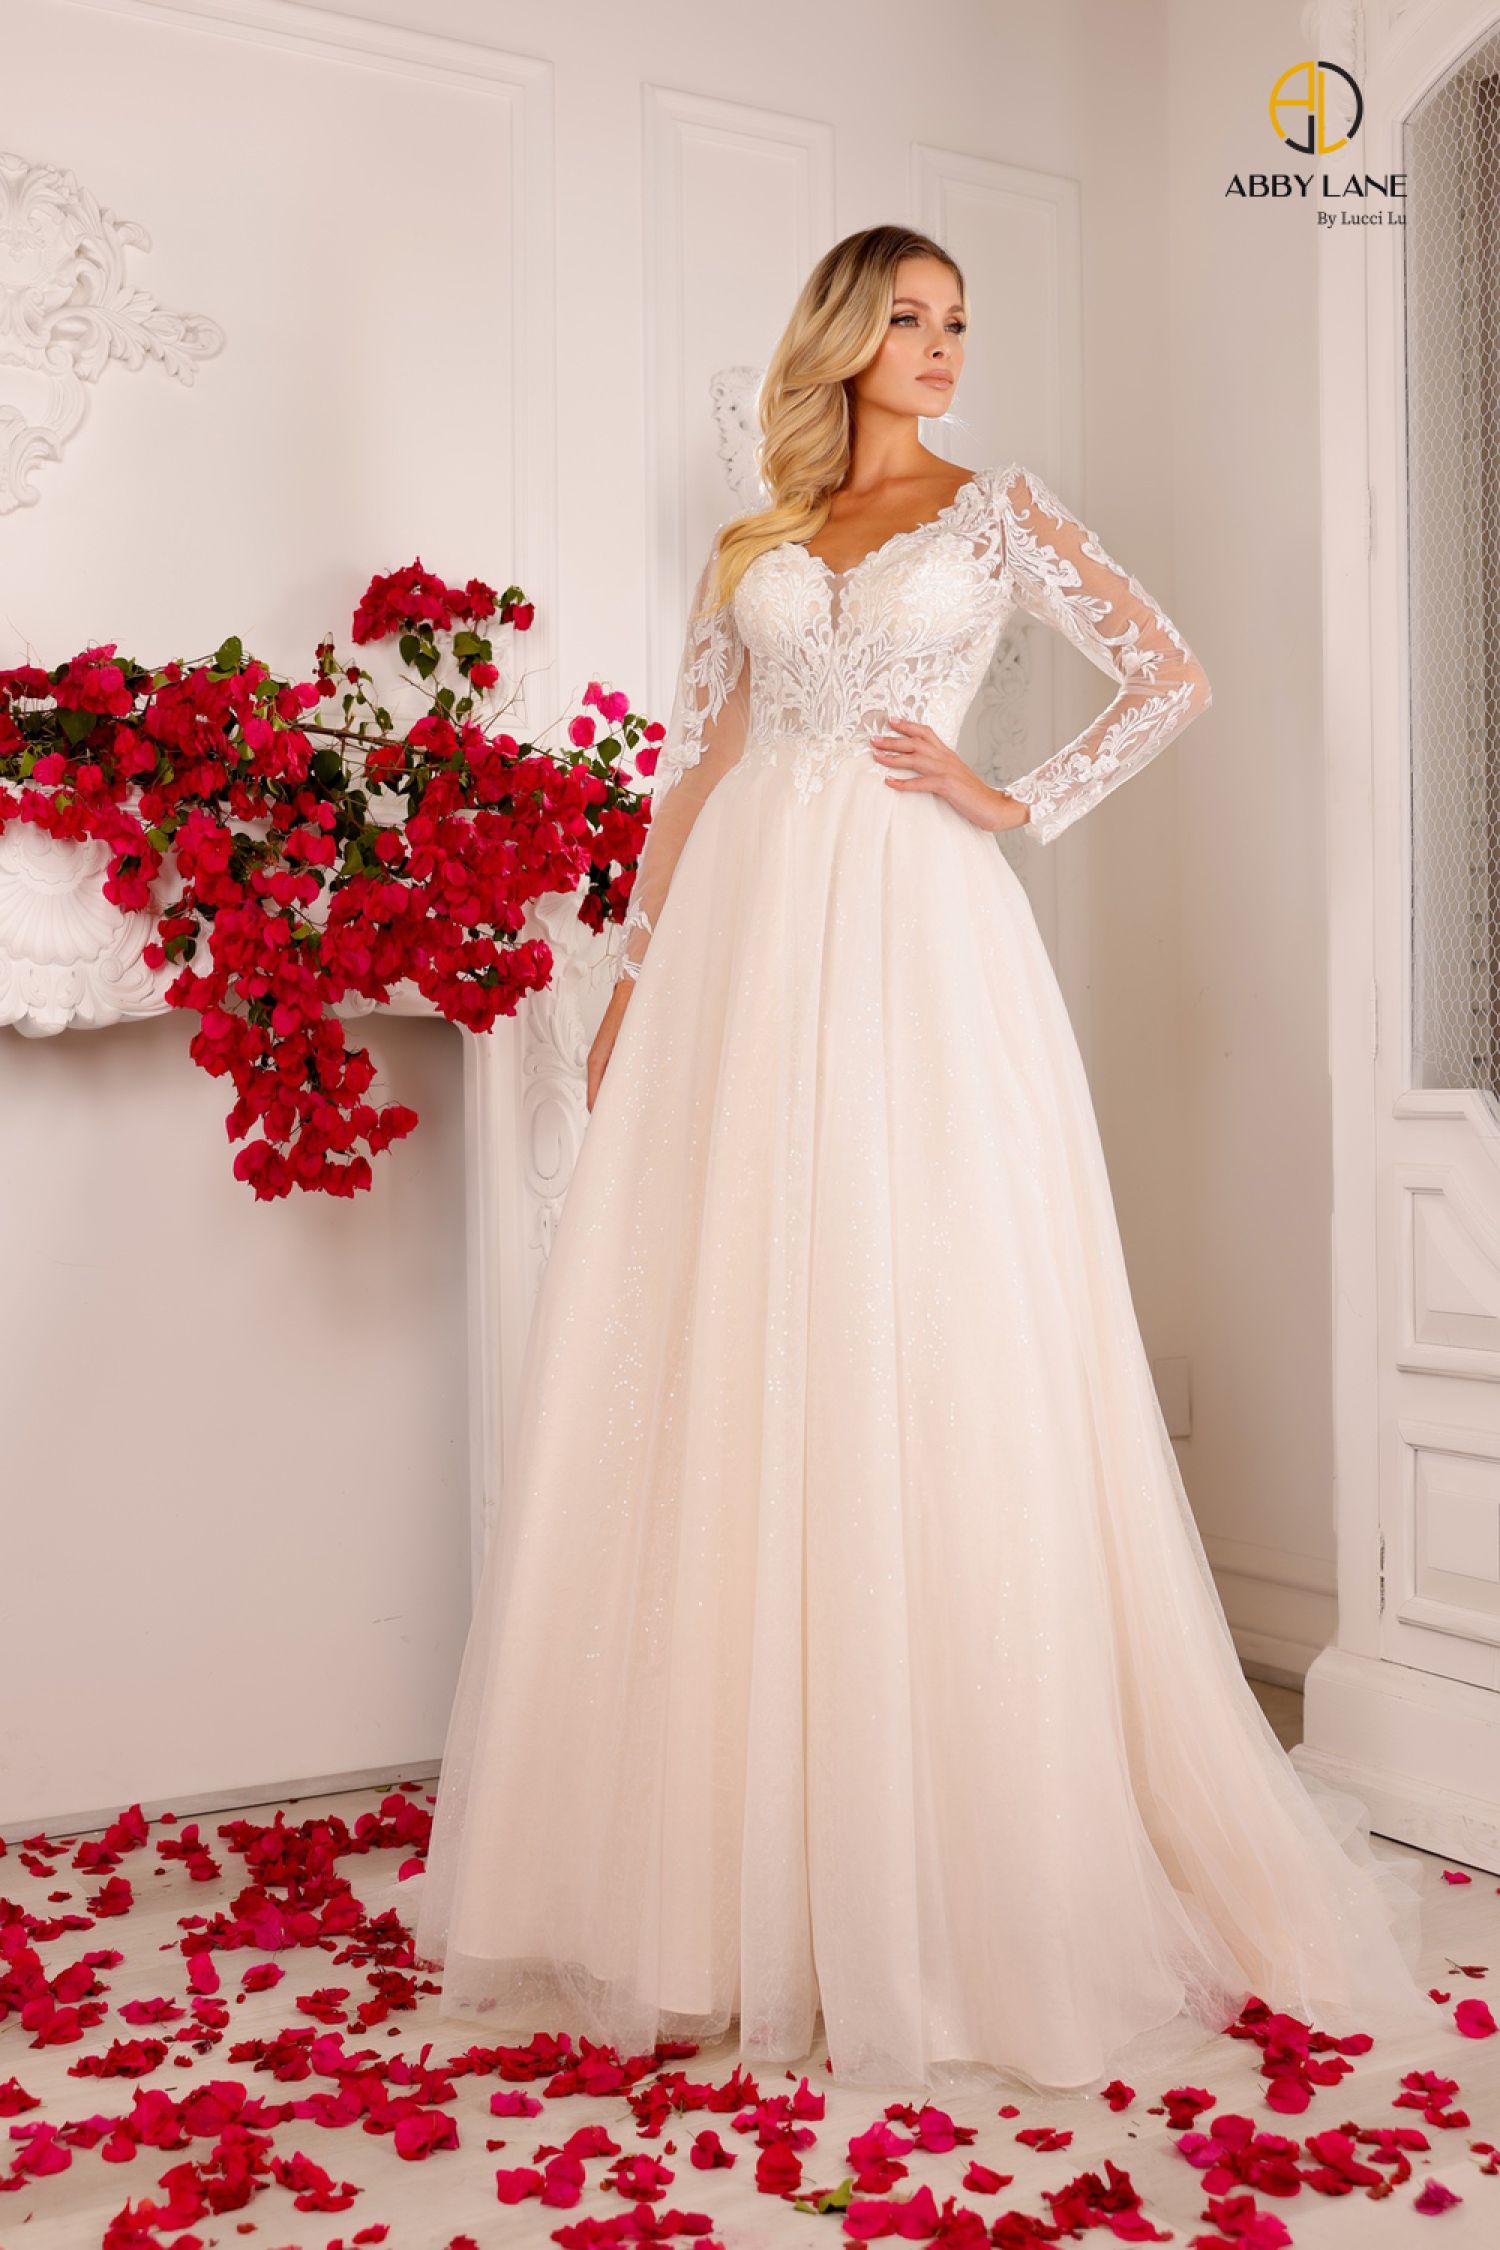 Lucci Lu 97136 A Line Wedding Dress Sheer Lace Long Sleeve Bridal Gown Shimmer Tulle Backless  Sizes: 0-28  Color: Ivory 